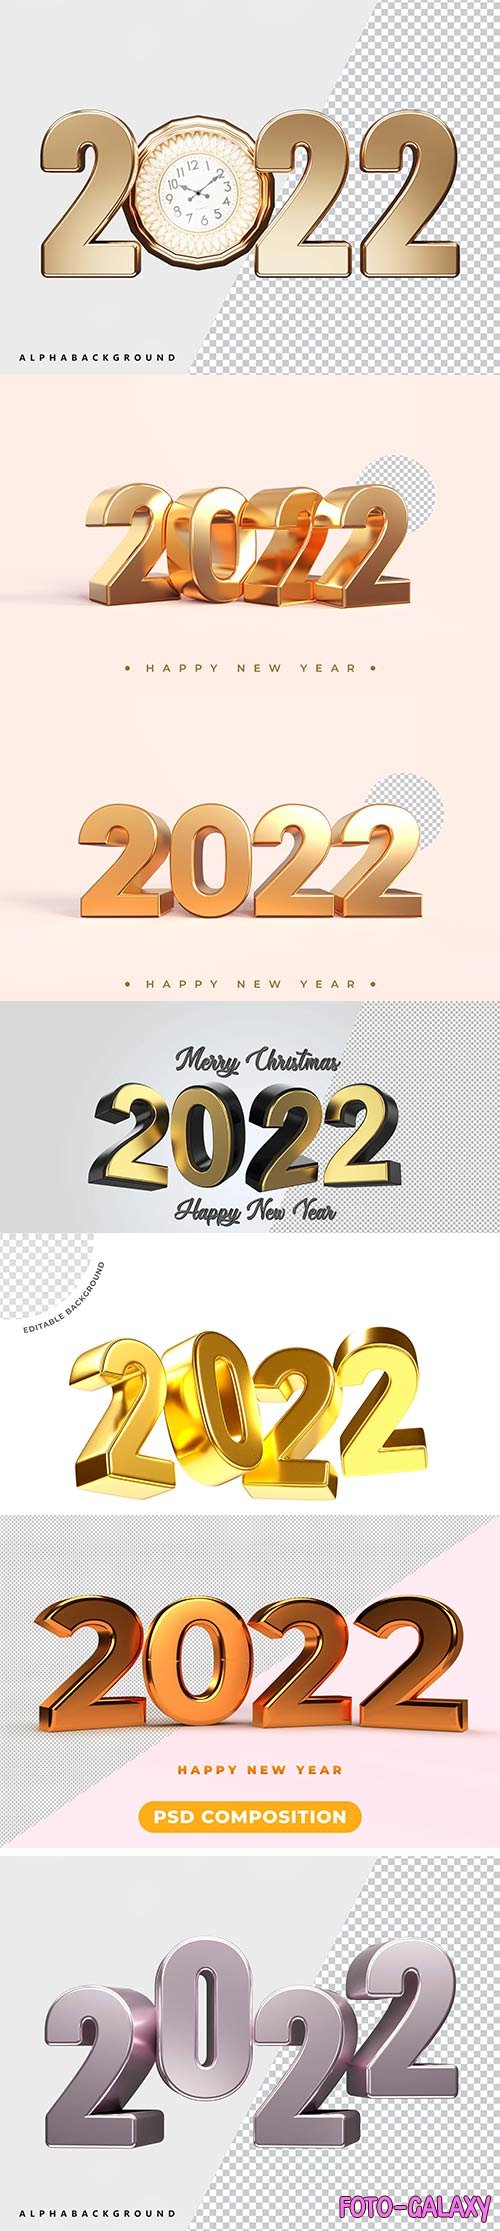 Psd Happy new year 2022 gold 3d rendering isolated on transparent background